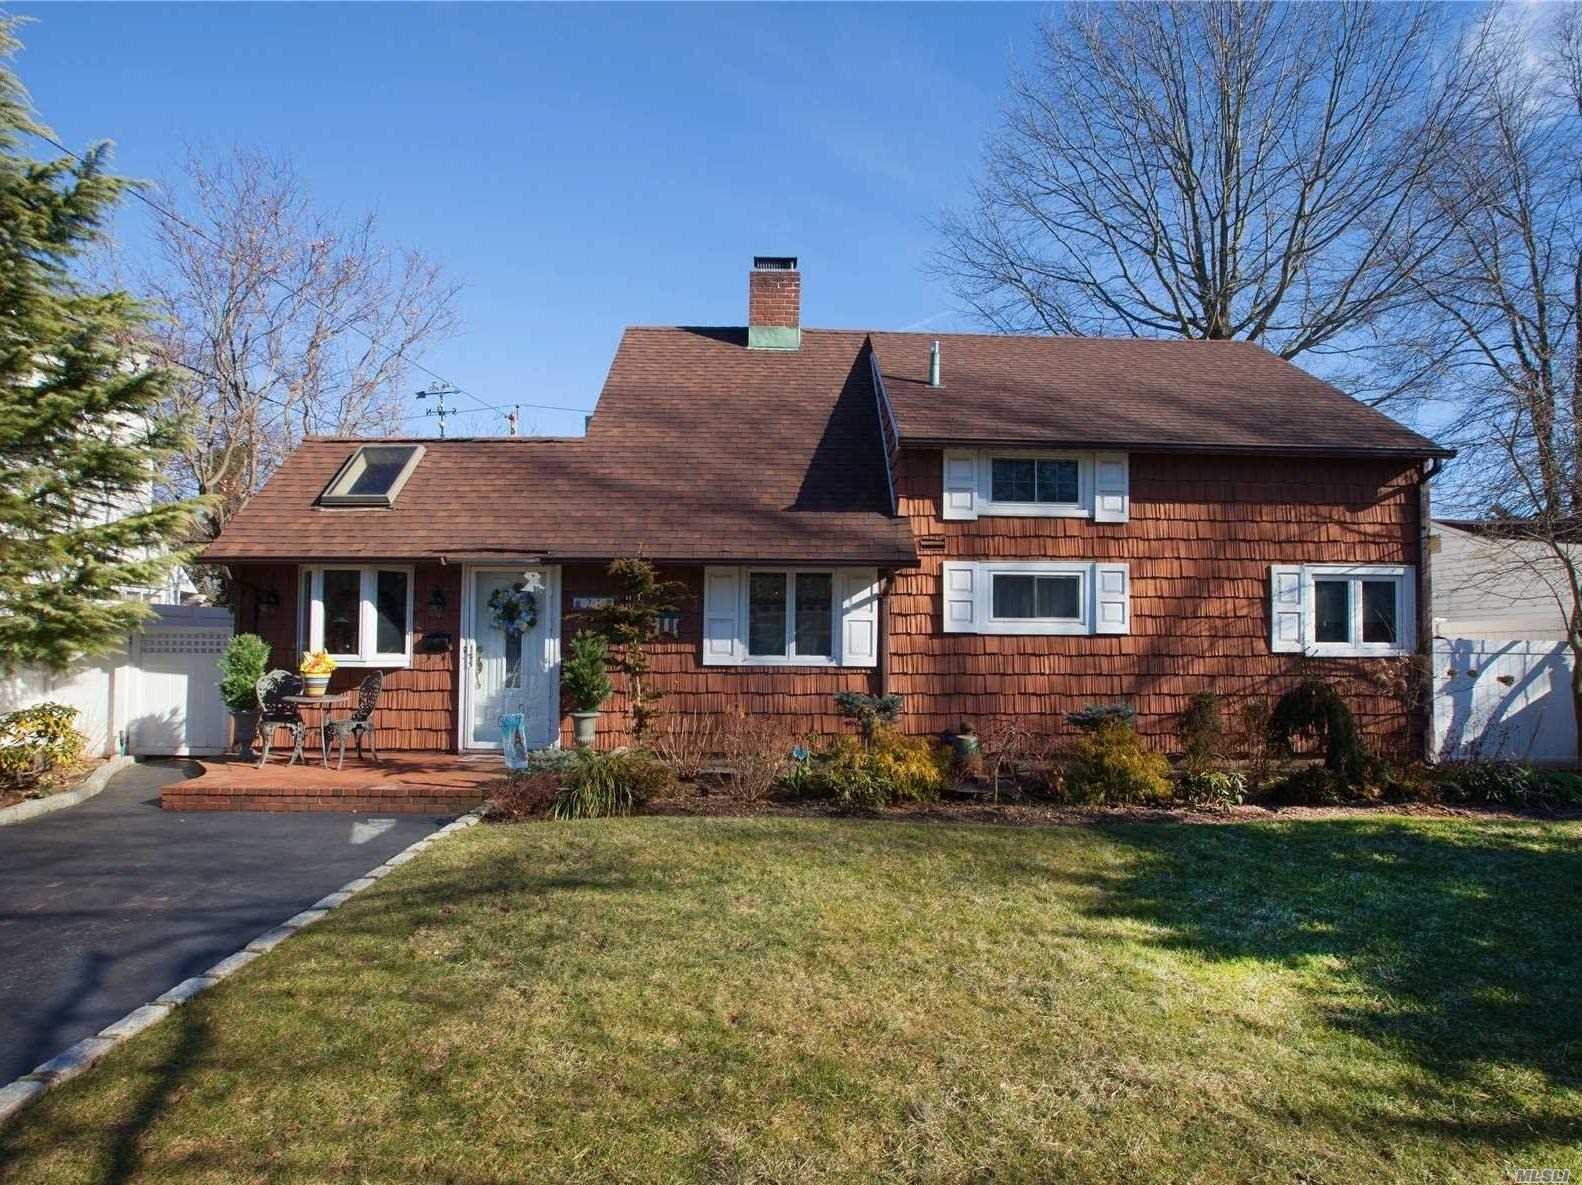 Charming Expanded Ranch With Incredibly Low Taxes $6550! This Home Features Living Room, Dining Room, Eat-In-Kitchen, Den, 4 Bedrooms And Bath. New Roof, New Siding Well Maintained Home Situated In The A Section Of Hicksville Minutes Away From Lirr, Highway And Shopping.